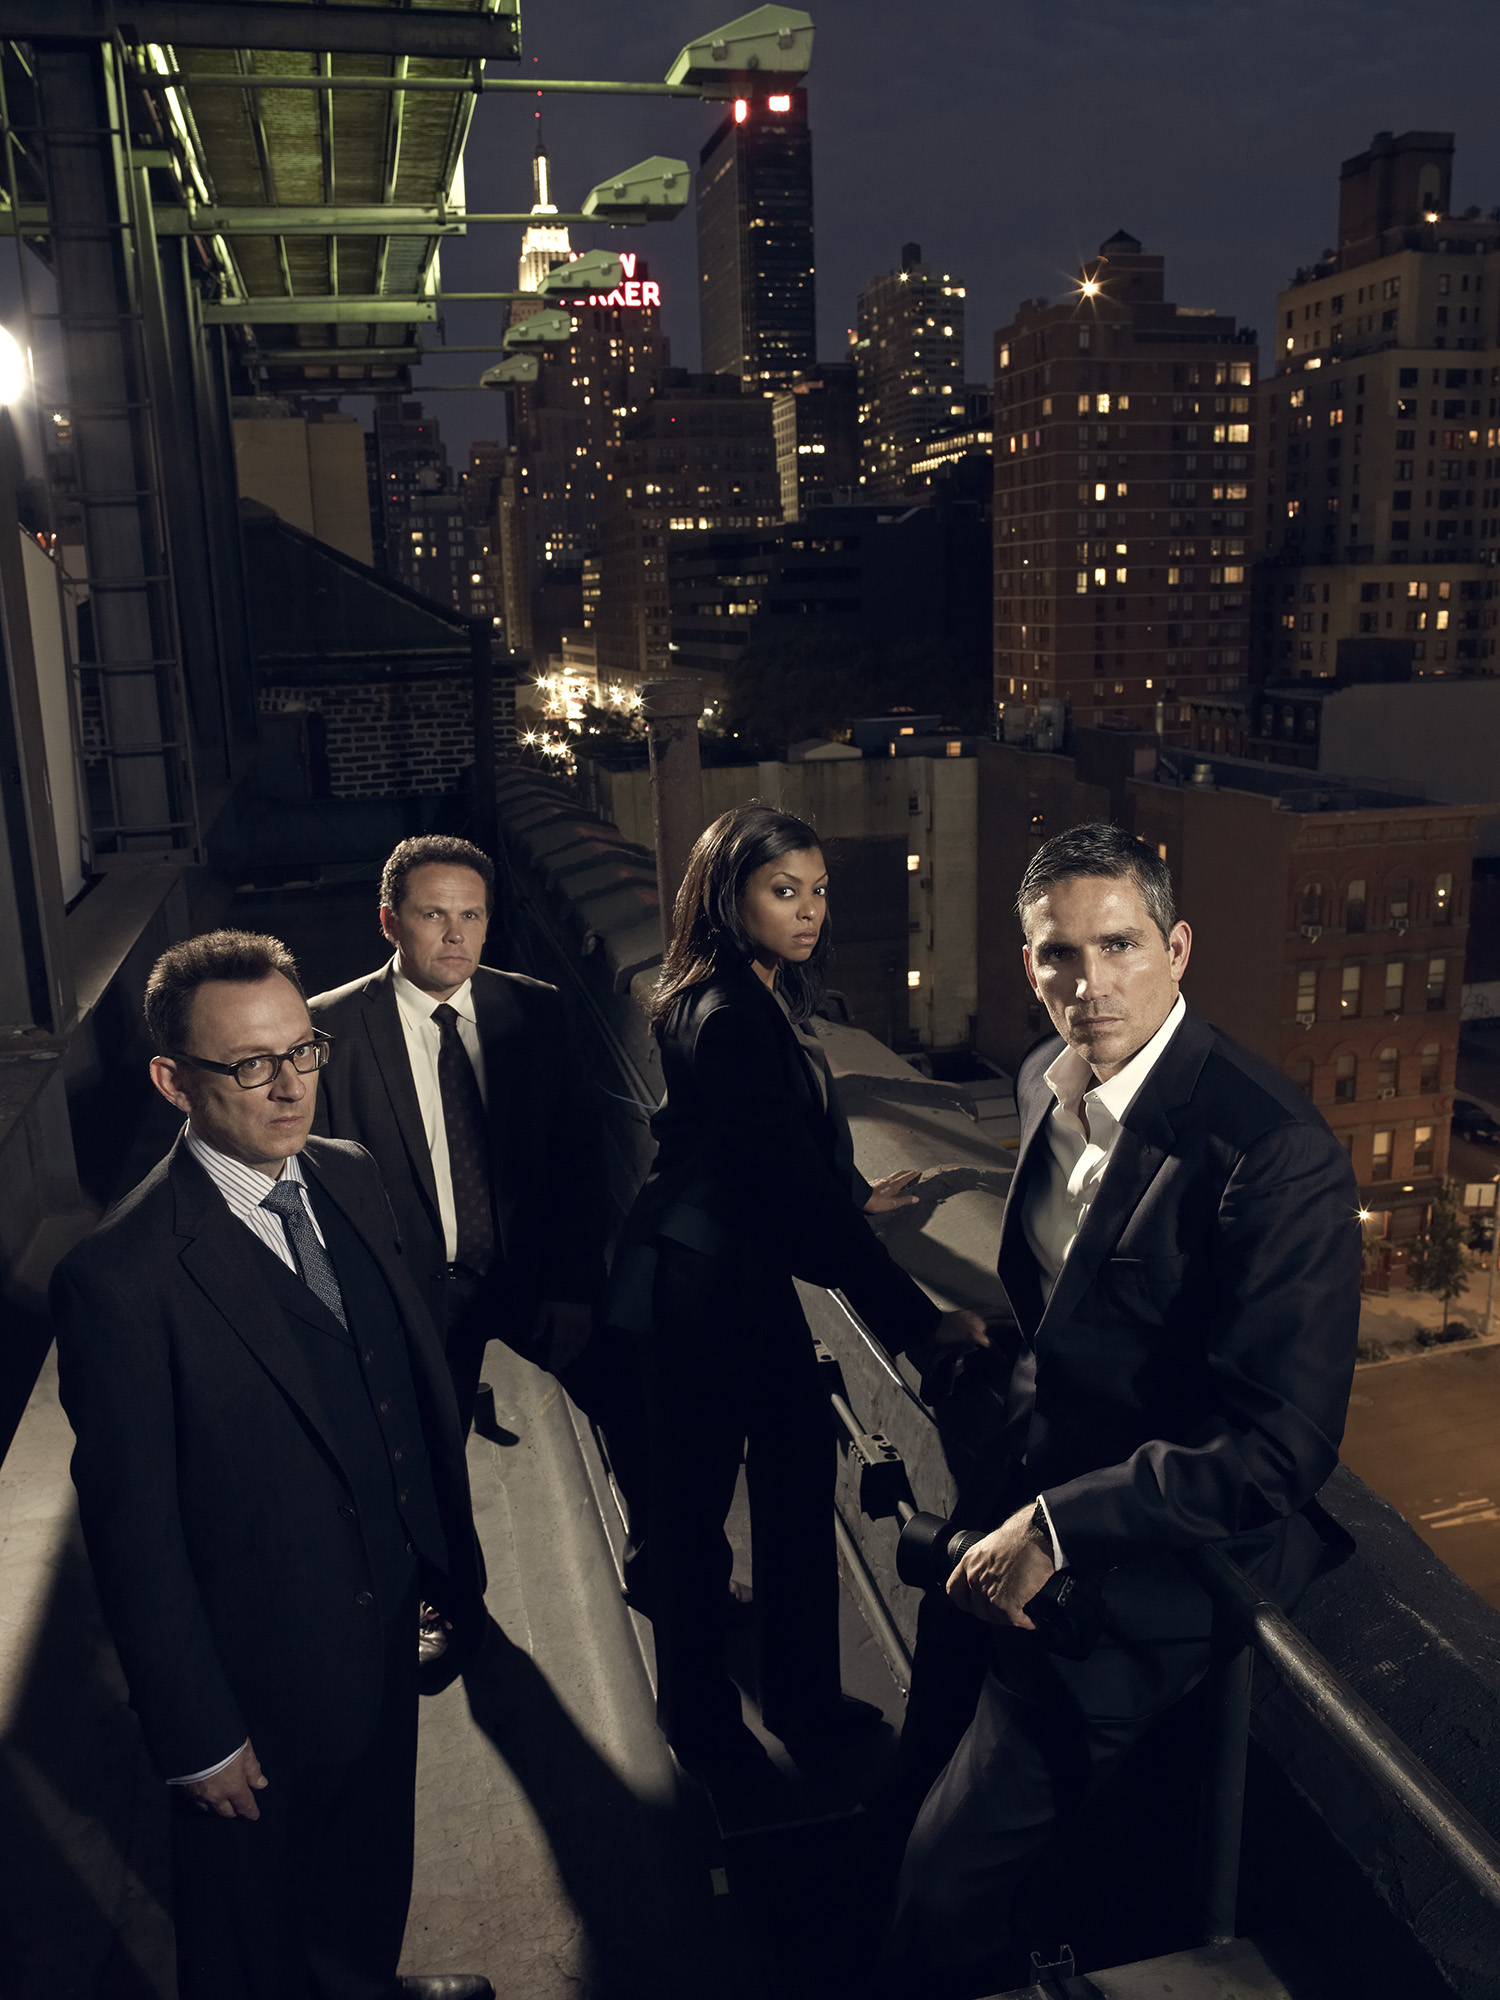 The Machine Goes Digital Hit Drama Series Person Of Interest Available